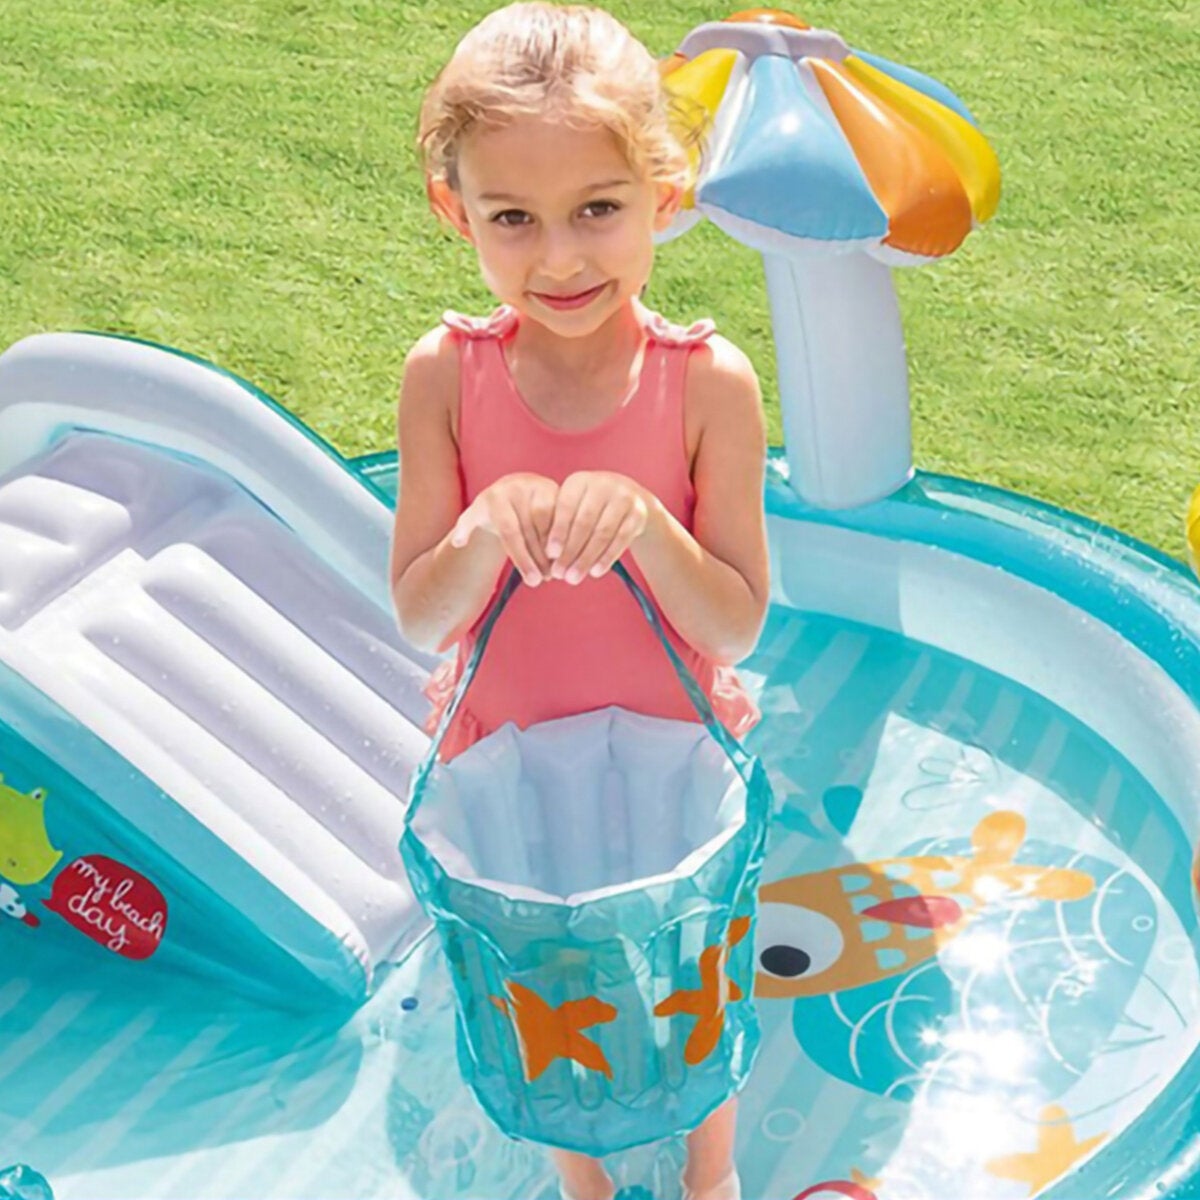 Crocodile Park Children's Inflatable Swimming Pool Summer Play Pool